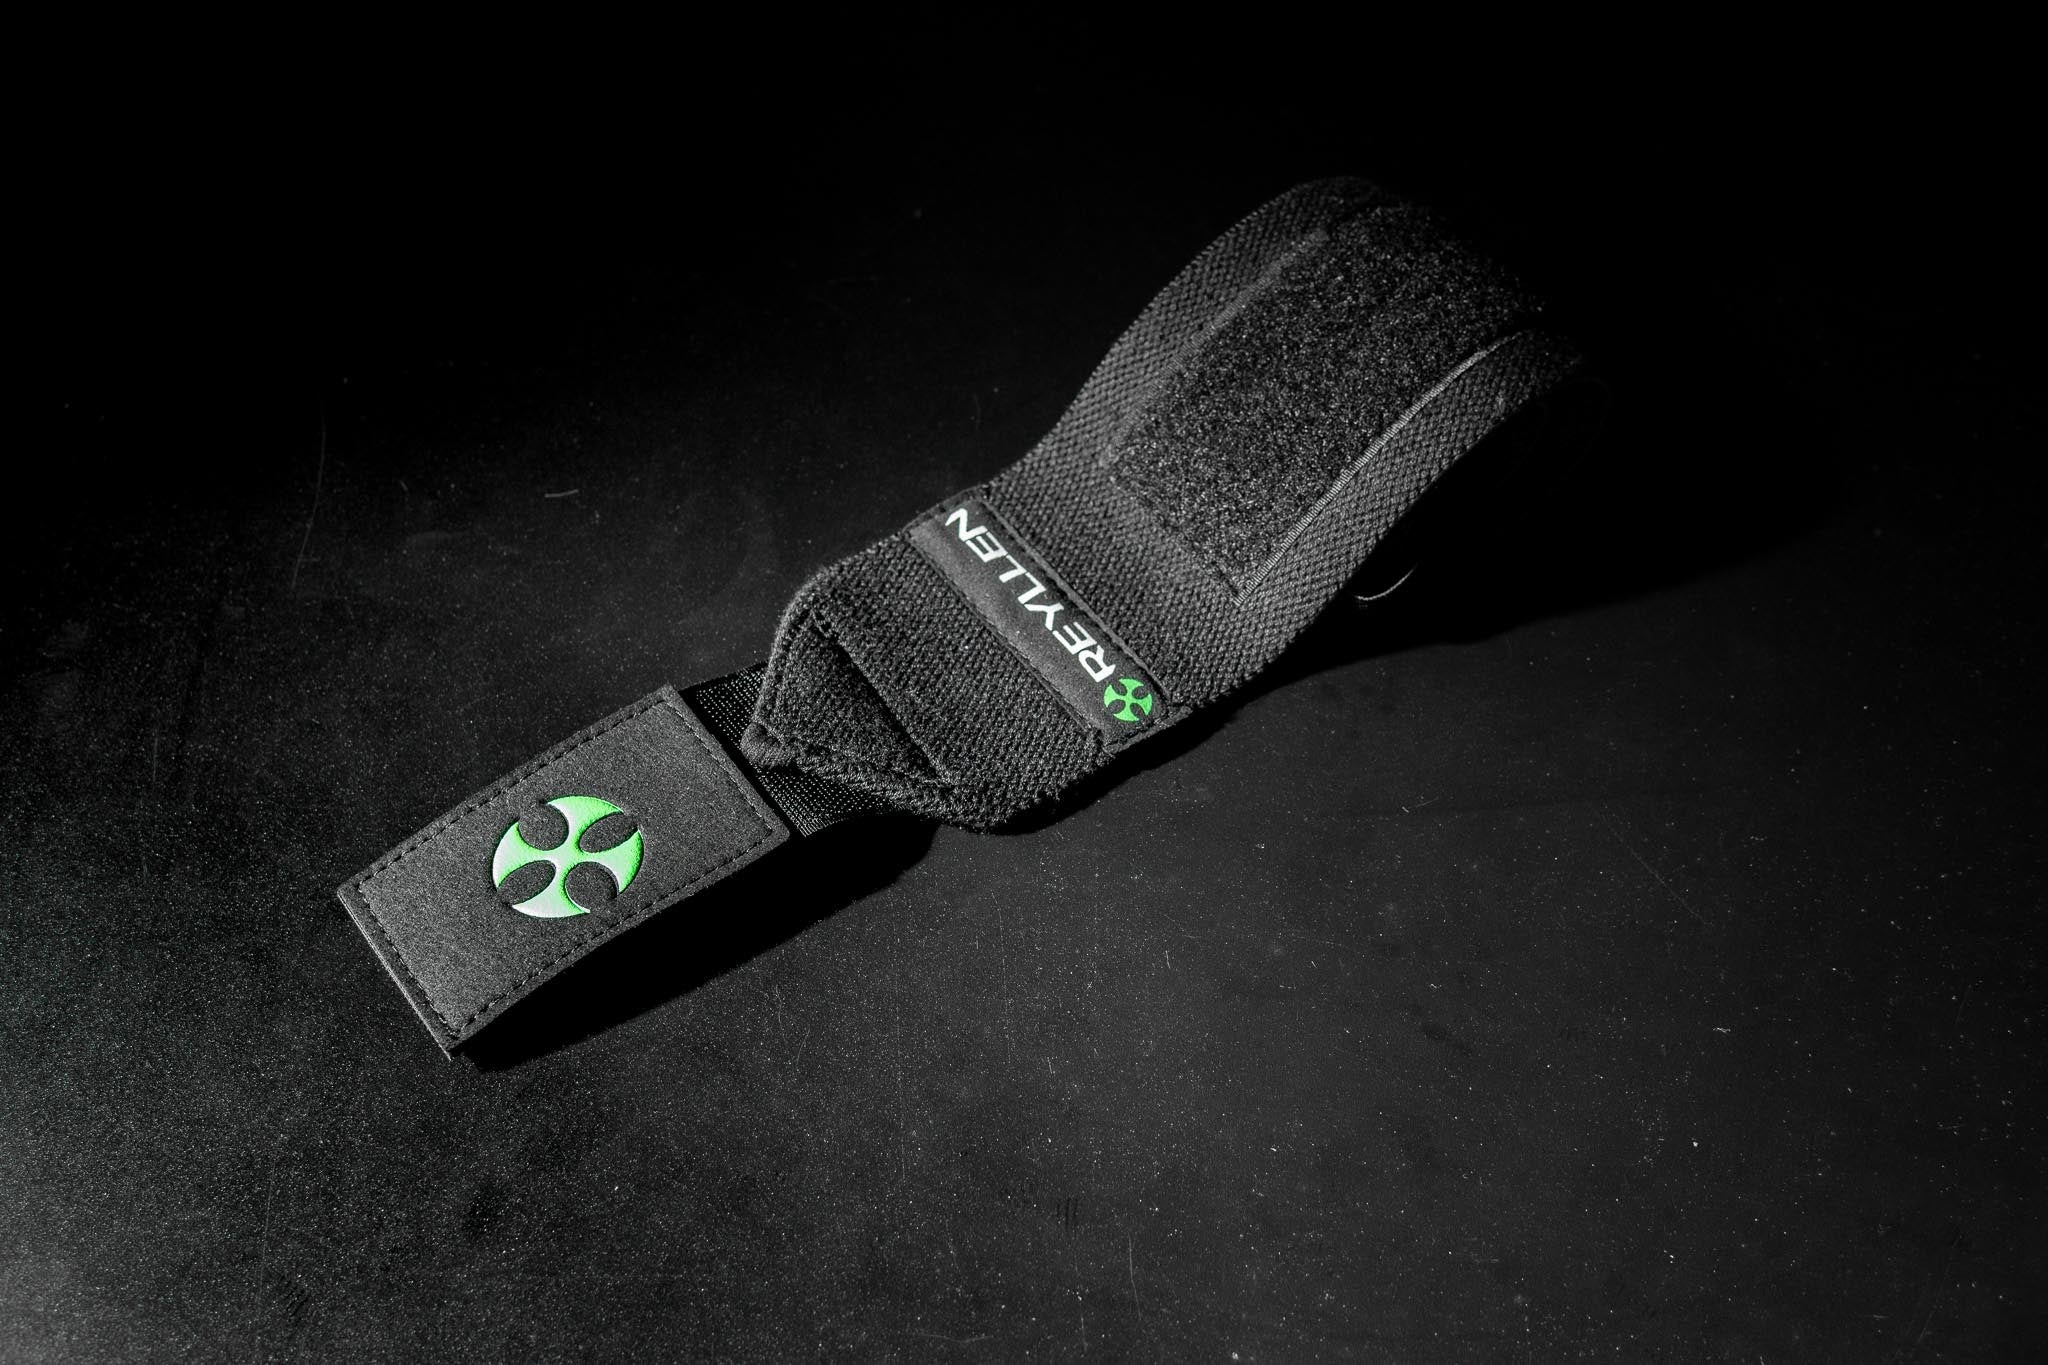 Reyllen X1 Wrist wraps bands for weightlifting and crossfit feature 3